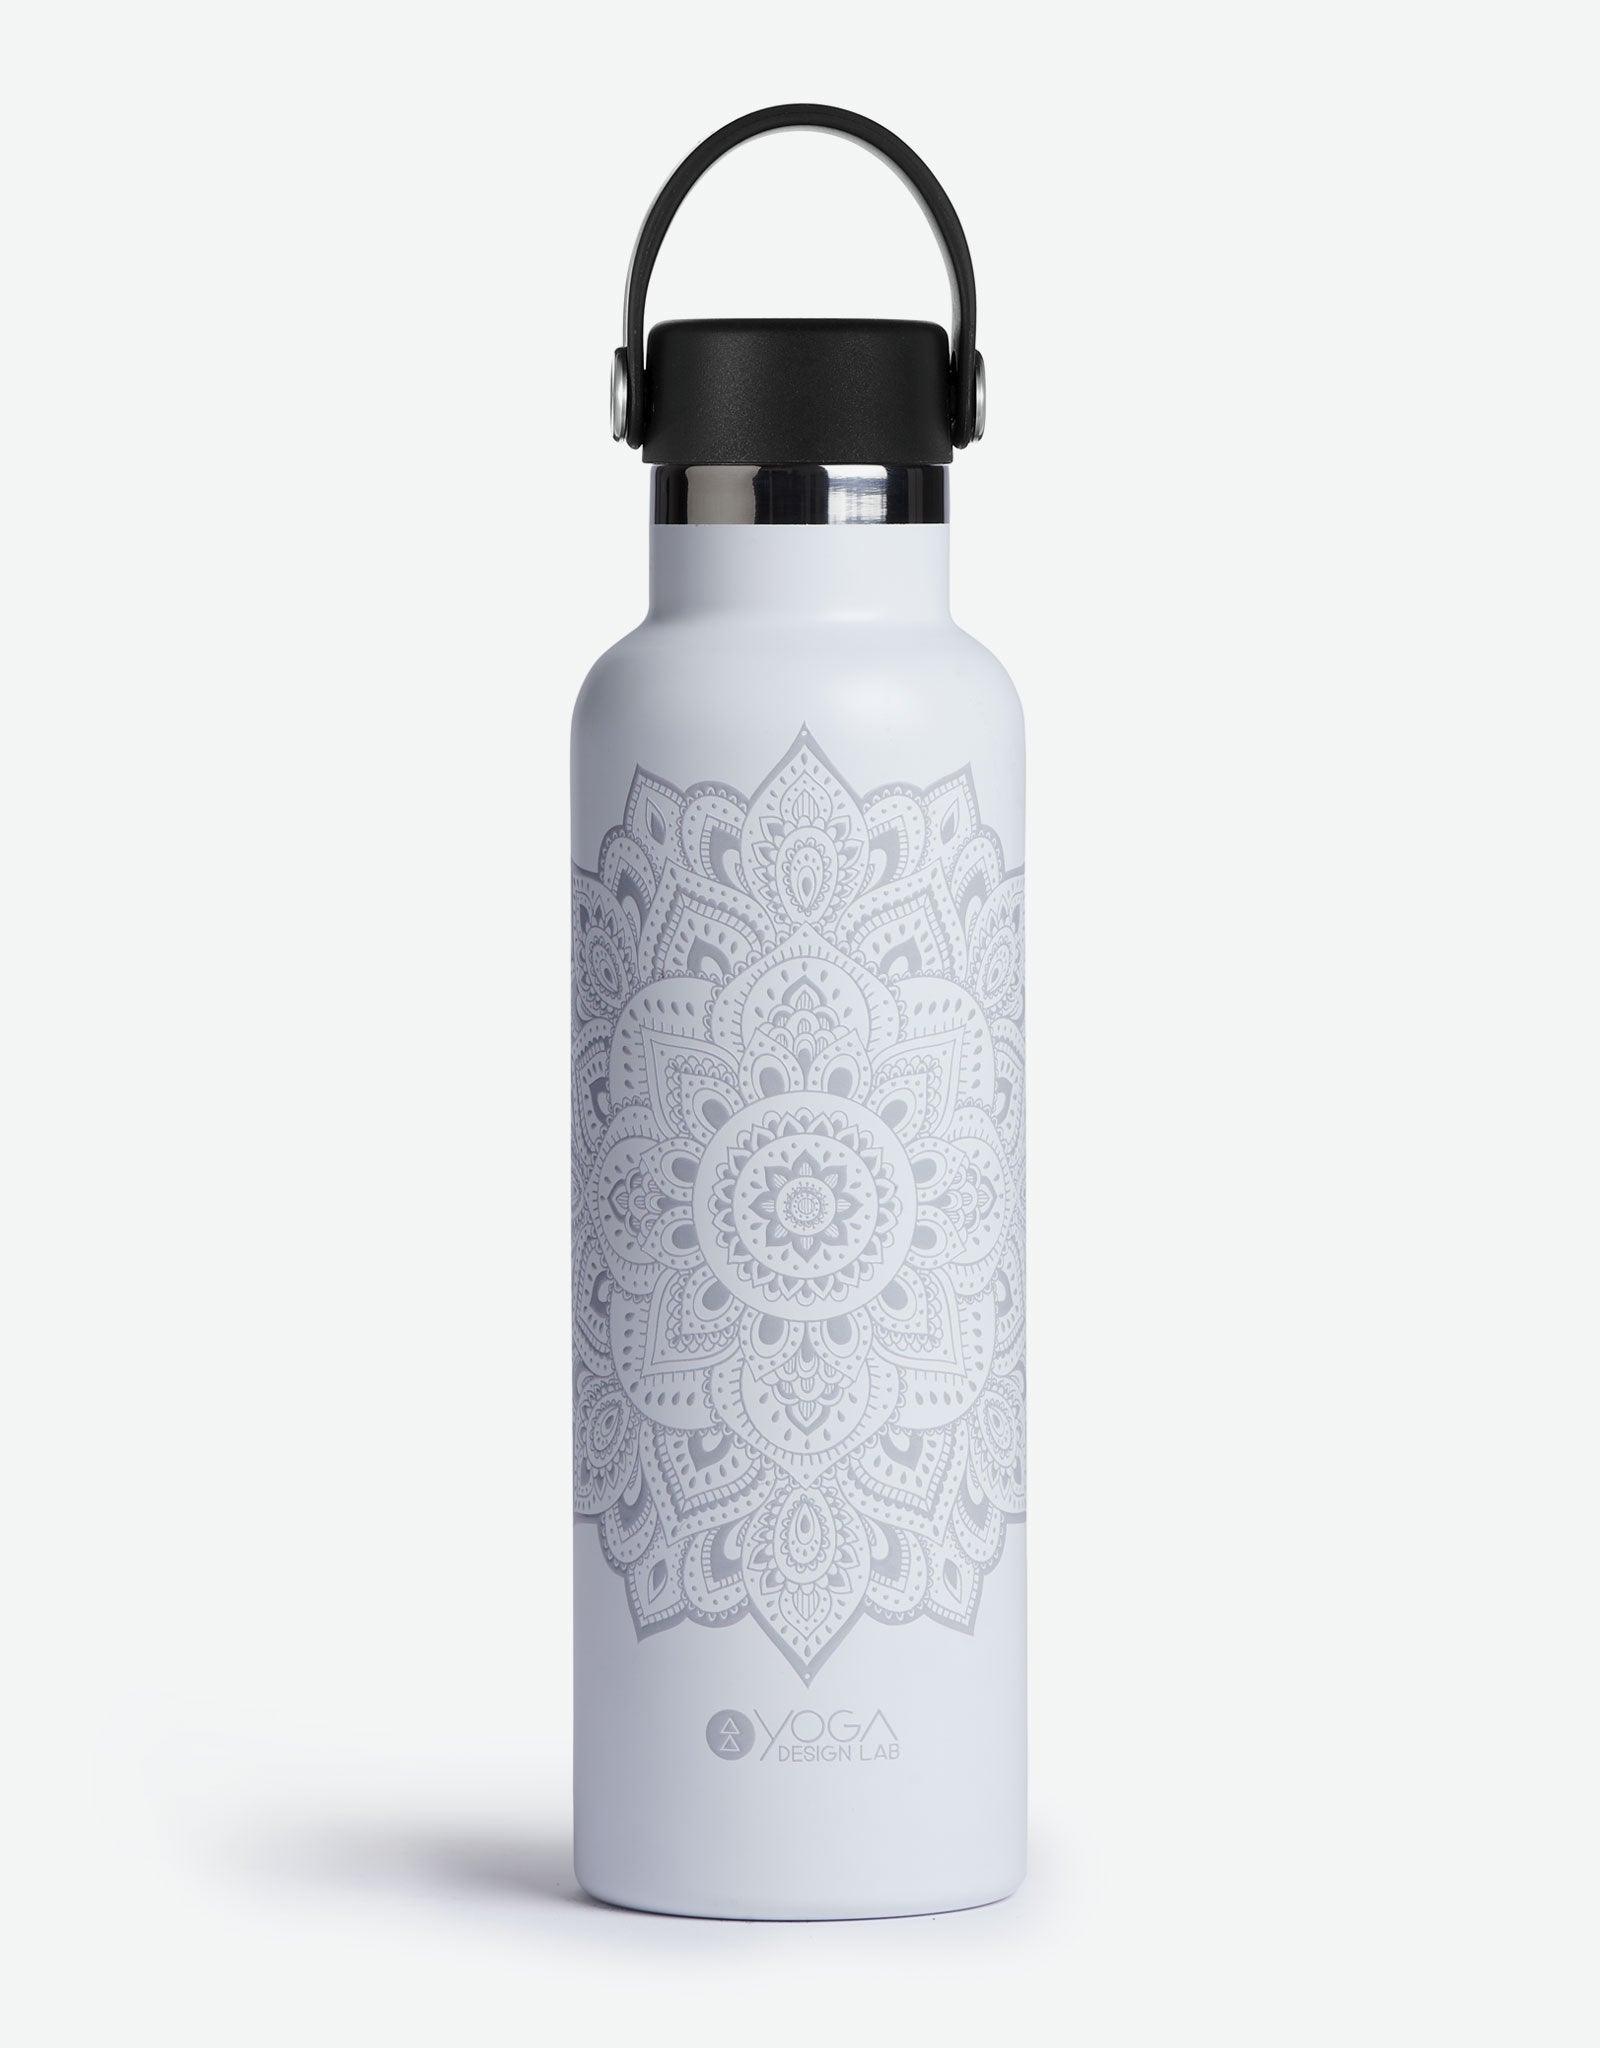 Insulated Squeeze Bottle Silver Bottle